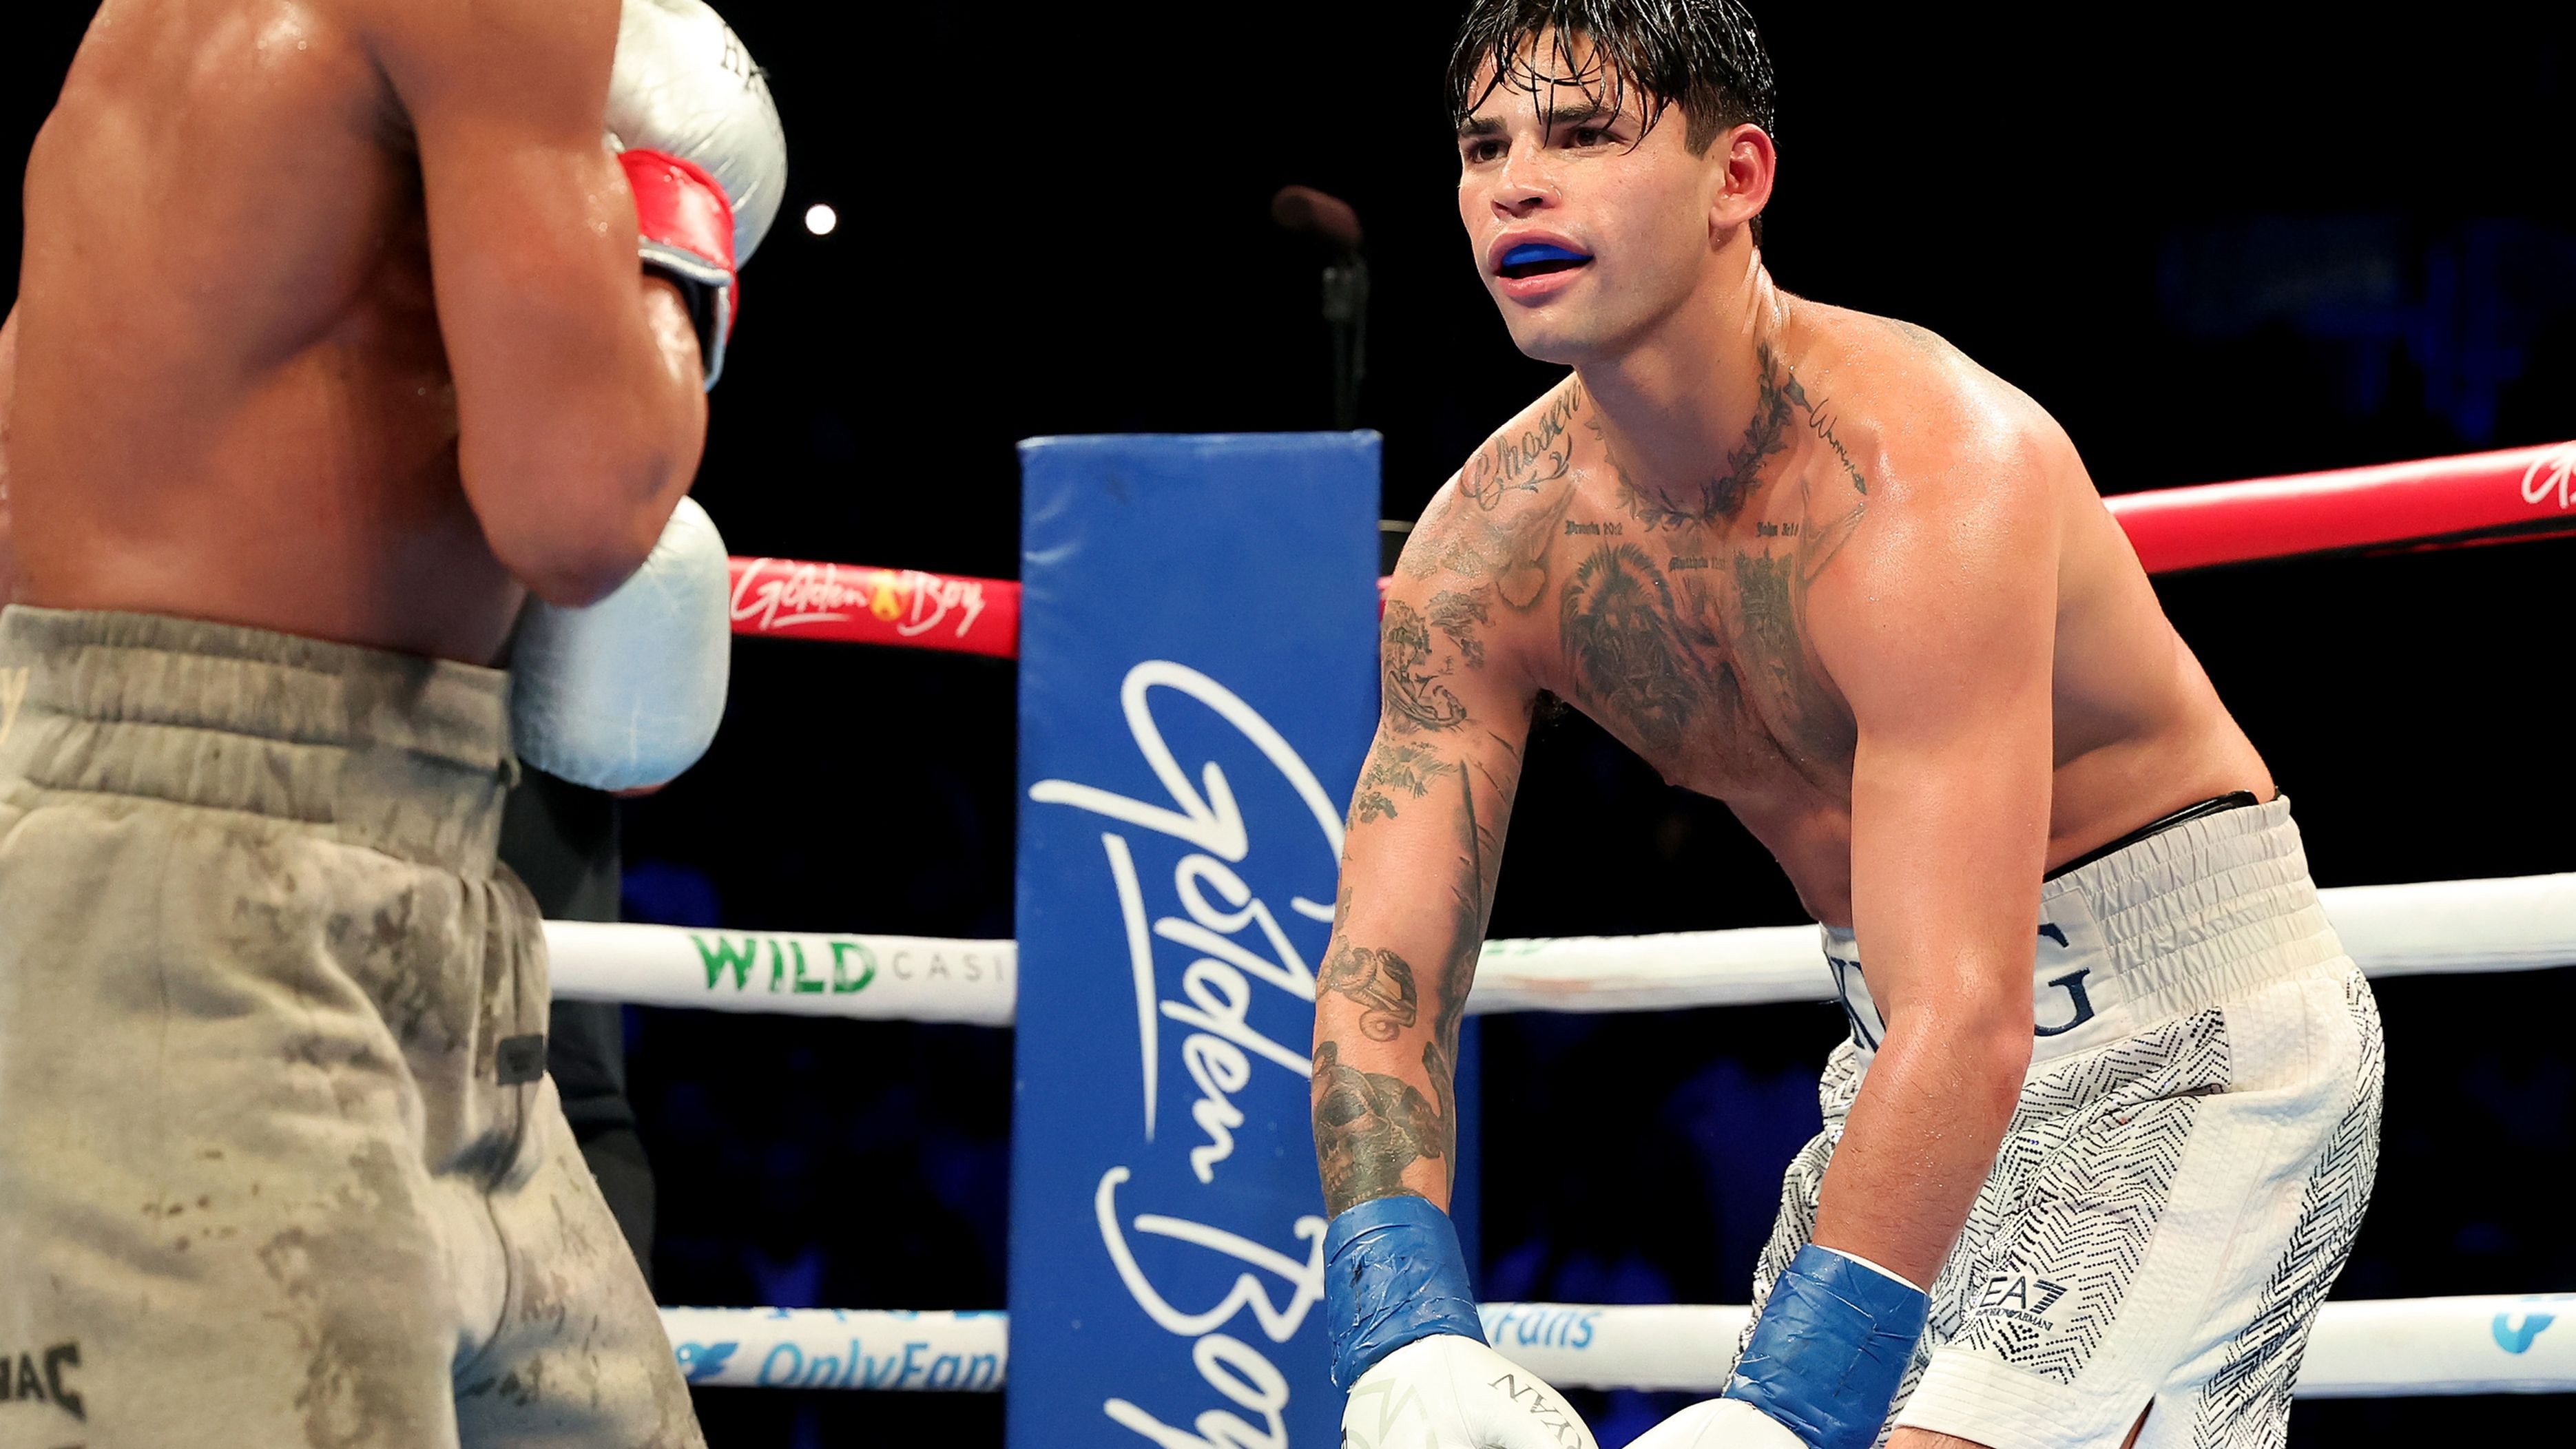 Ryan Garcia taunts Devin Haney at the Barclays Centre.